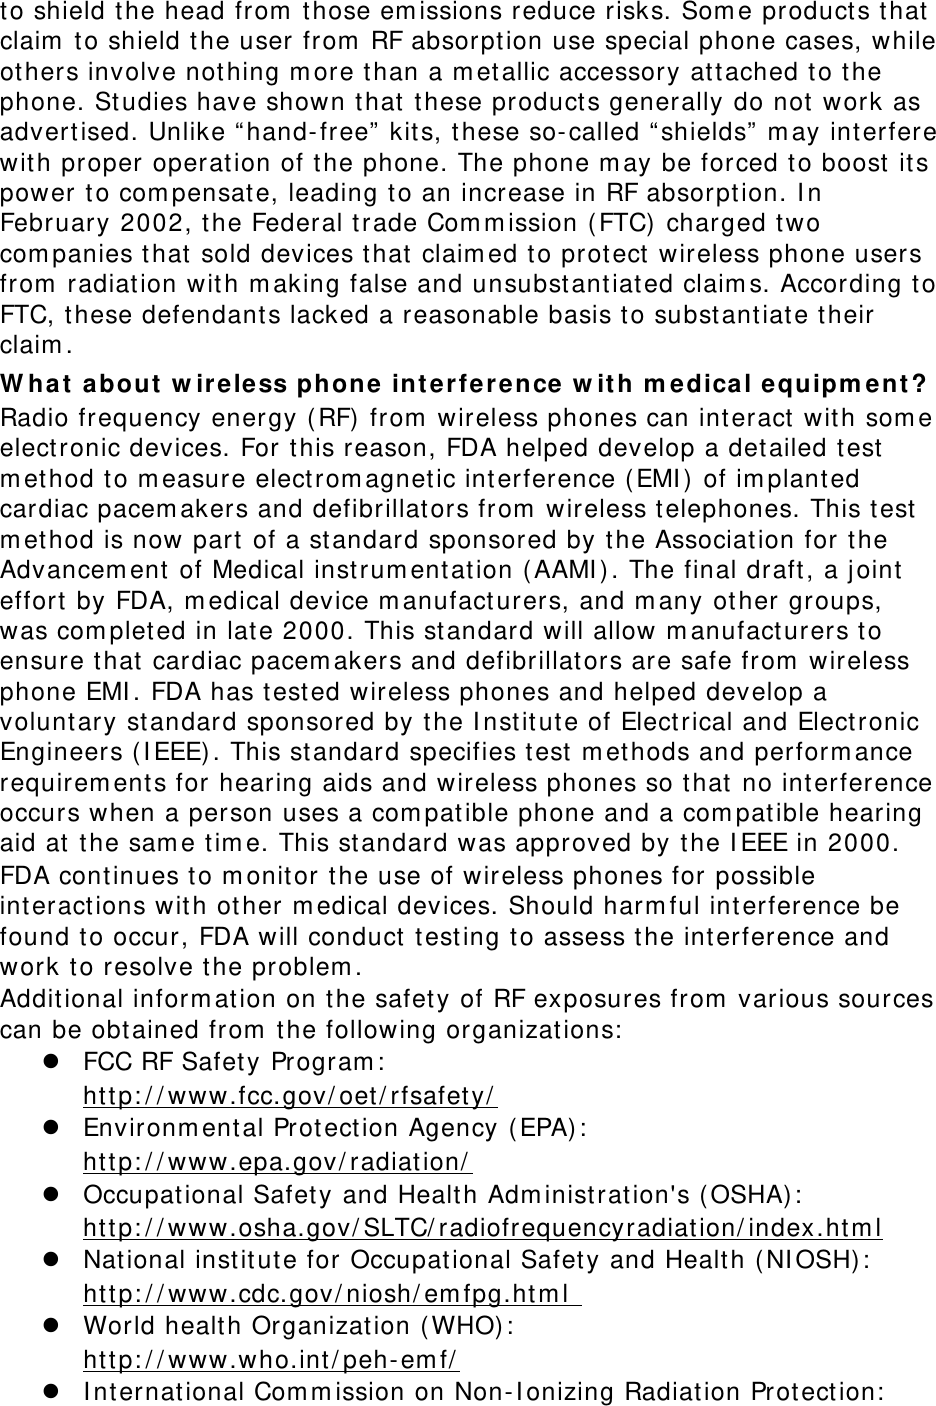 to shield t he head from  those em issions reduce risks. Som e products t hat claim  to shield t he user from  RF absorpt ion use special phone cases, while others involve not hing m ore t han a m etallic accessory att ached to t he phone. St udies have shown t hat t hese product s generally do not work as adver t ised. Unlike “ hand-free”  kits, t hese so-called “ shields”  m ay interfere with proper operation of t he phone. The phone m ay be forced t o boost  its power to com pensat e, leading to an increase in RF absorpt ion. I n February 2002, the Federal trade Com m ission ( FTC) charged two com panies t hat sold devices that claim ed t o protect  wireless phone users from  radiat ion wit h m aking false and unsubst ant iated claim s. According to FTC, these defendant s lacked a reasonable basis to subst ant iate t heir claim . W ha t  a bout  w ireless phon e  in t erfe rence w it h m edical e quipm ent ? Radio fr equency energy ( RF)  from  wireless phones can int eract  with som e elect ronic devices. For t his reason, FDA helped develop a detailed test  m ethod to m easure electrom agnetic int erference (EMI )  of im plant ed cardiac pacem akers and defibrillators from  wireless t elephones. This test  m ethod is now part  of a st andard sponsored by t he Association for the Advancem ent  of Medical instrum ent at ion ( AAMI ) . The final dr aft , a j oint  effort  by FDA, m edical device m anufact urers, and m any  other groups, was com pleted in late 2000. This st andard will allow m anufact urers to ensure t hat cardiac pacem akers and defibrillators are safe from  wireless phone EMI . FDA has t est ed wireless phones and helped develop a voluntary st andard sponsored by t he I nst it ut e of Elect rical and Electr onic Engineers (I EEE) . This st andard specifies t est  m ethods and perform ance requirem ent s for hearing aids and wireless phones so that  no int erference occurs when a person uses a com patible phone and a com patible hearing aid at t he sam e t im e. This standard was approved by the I EEE in 2000. FDA cont inues to m onitor t he use of wireless phones for possible int eractions wit h ot her m edical devices. Should harm ful int erference be found to occur, FDA will conduct  test ing t o assess the int erference and work t o resolve the problem . Additional inform ation on the safety of RF exposures from  various sources can be obt ained from  t he following organizations:   FCC RF Safety Program :    Environm ental Prot ect ion Agency  (EPA) :  ht tp: / / www.fcc.gov/ oet/ rfsafety/    Occupational Safety and Health Adm inist ration&apos;s ( OSHA):    ht tp: / / www.epa.gov/ radiation/        National instit ut e for Occupational Safet y and Health ( NI OSH):  ht tp: / / www.osha.gov/ SLTC/ radiofrequencyradiat ion/ index.htm l   World health Organizat ion (WHO) :  ht tp: / / www.cdc.gov/ niosh/ em fpg.ht m l     I nt ernational Com m ission on Non-I onizing Radiation Protect ion:  ht tp: / / www.who.int / peh-em f/  